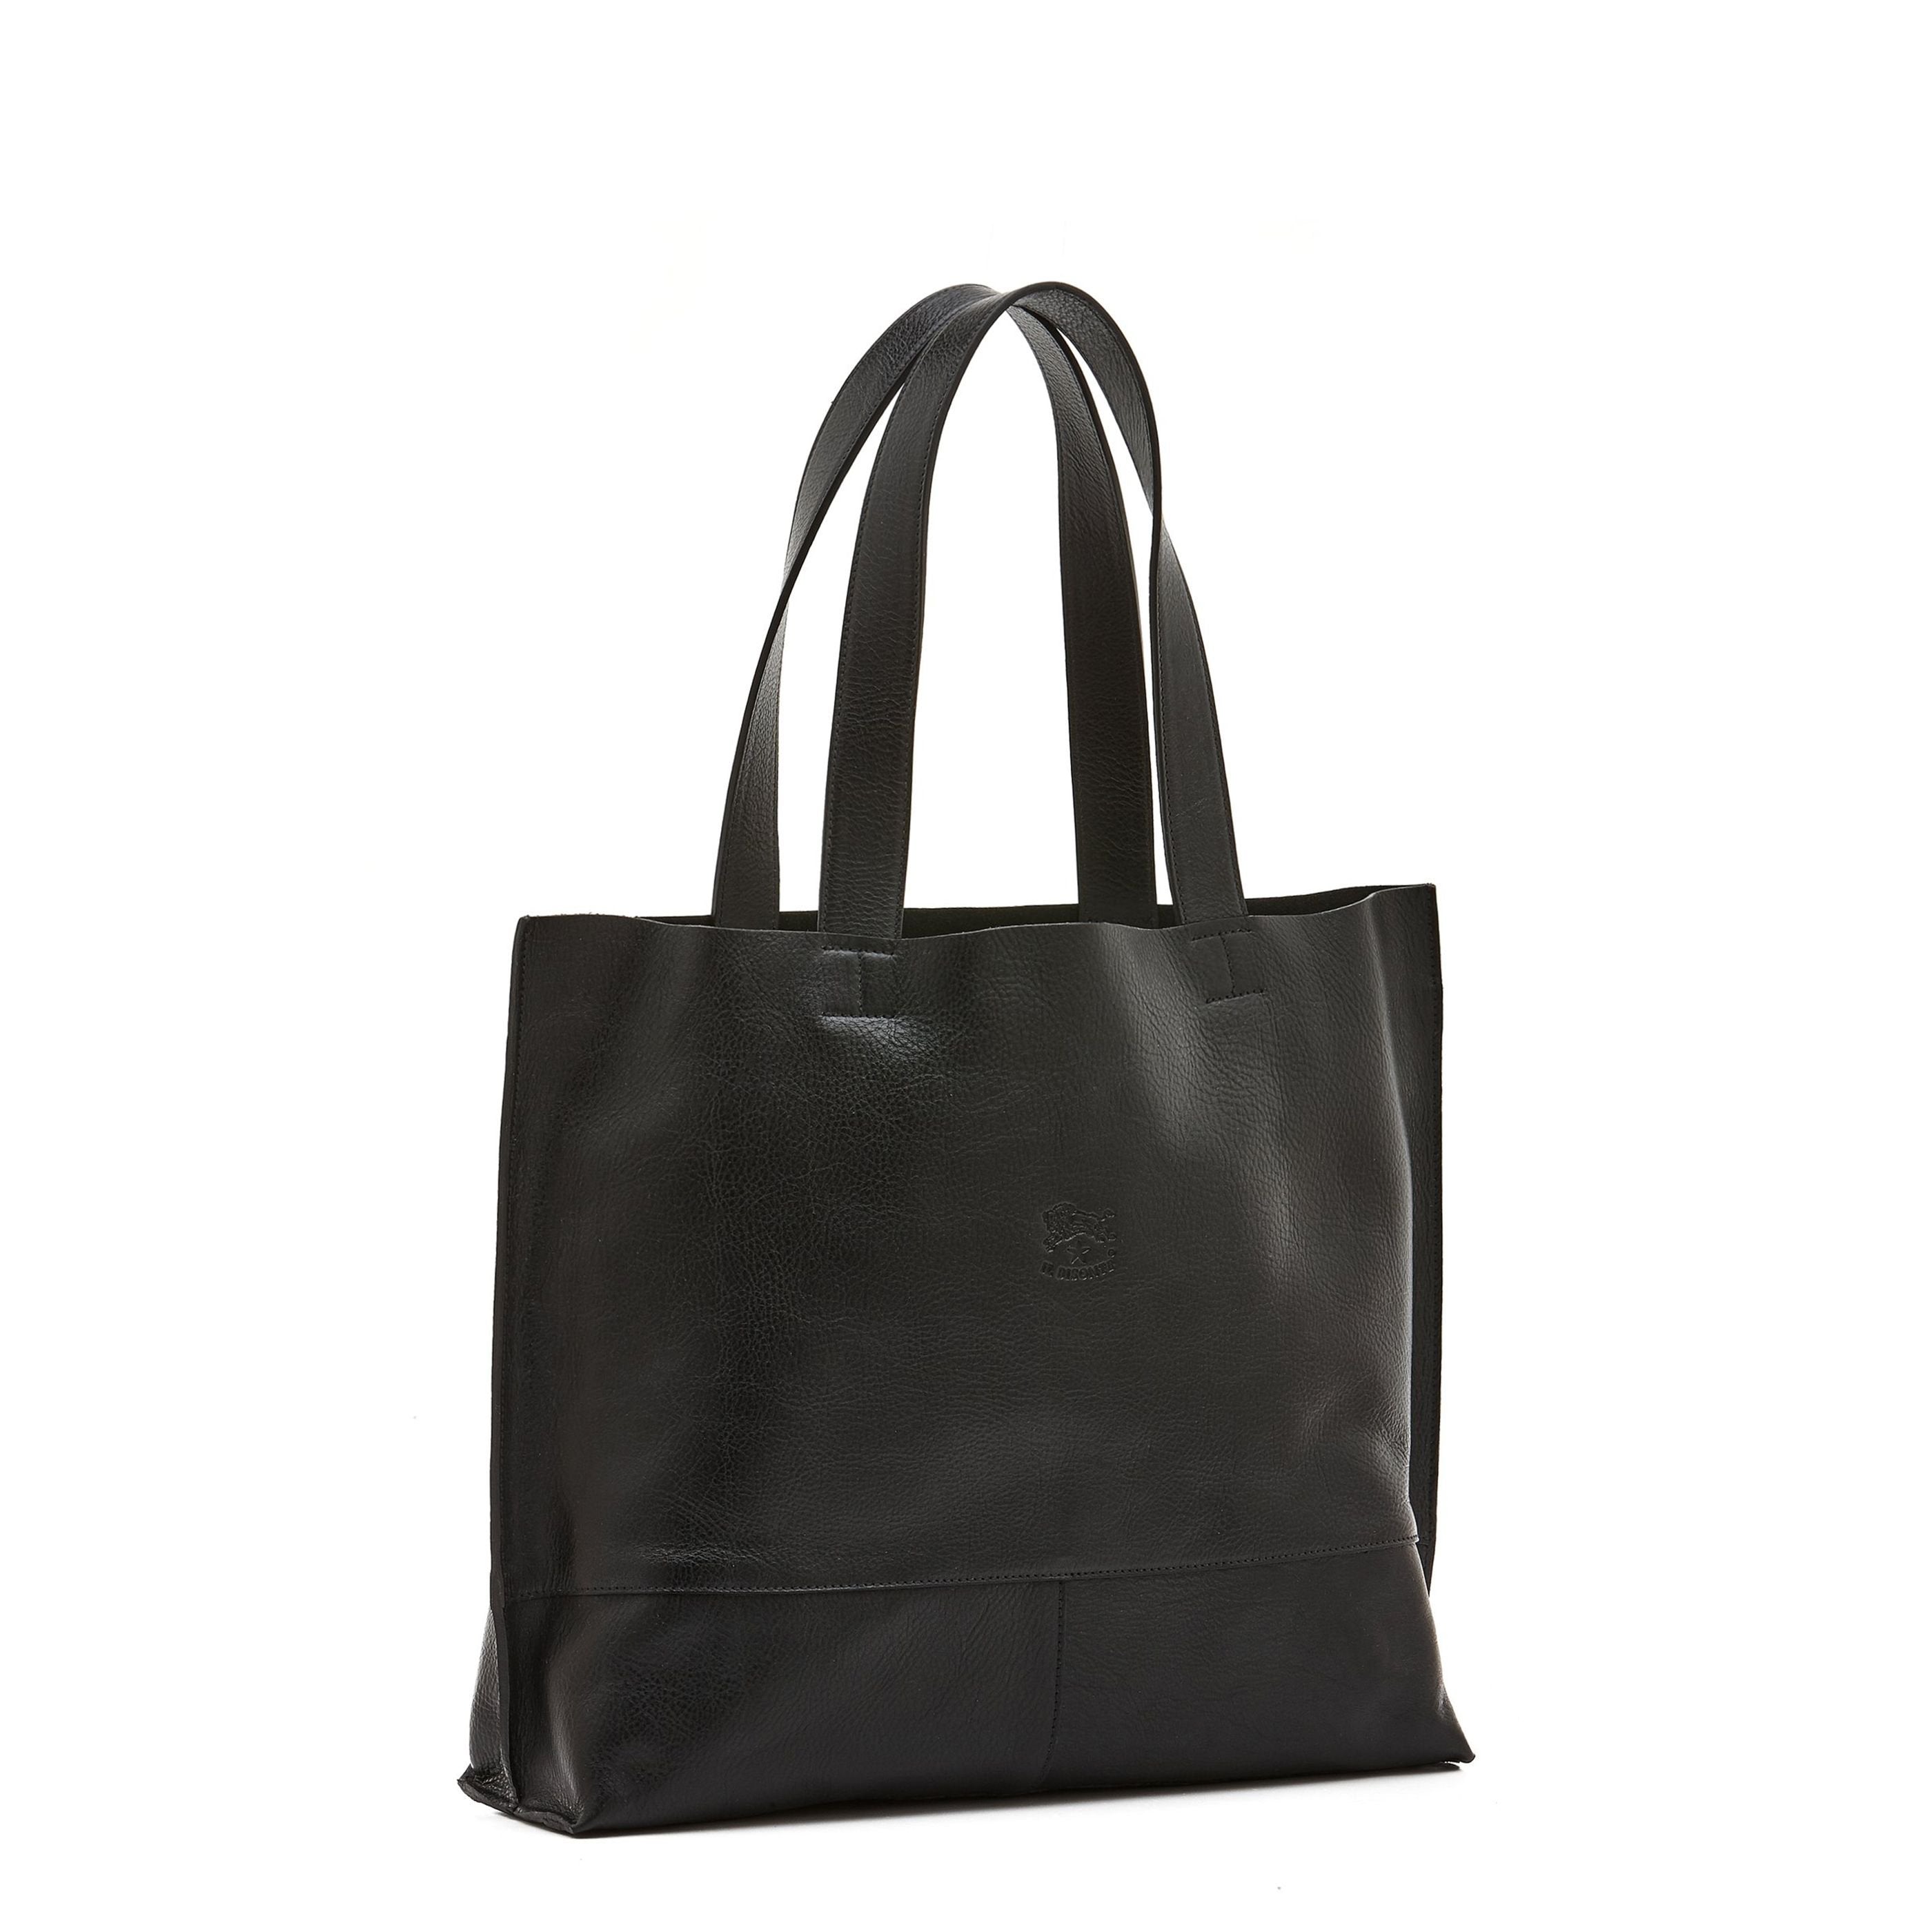 Talamone | Women's tote bag in leather color black